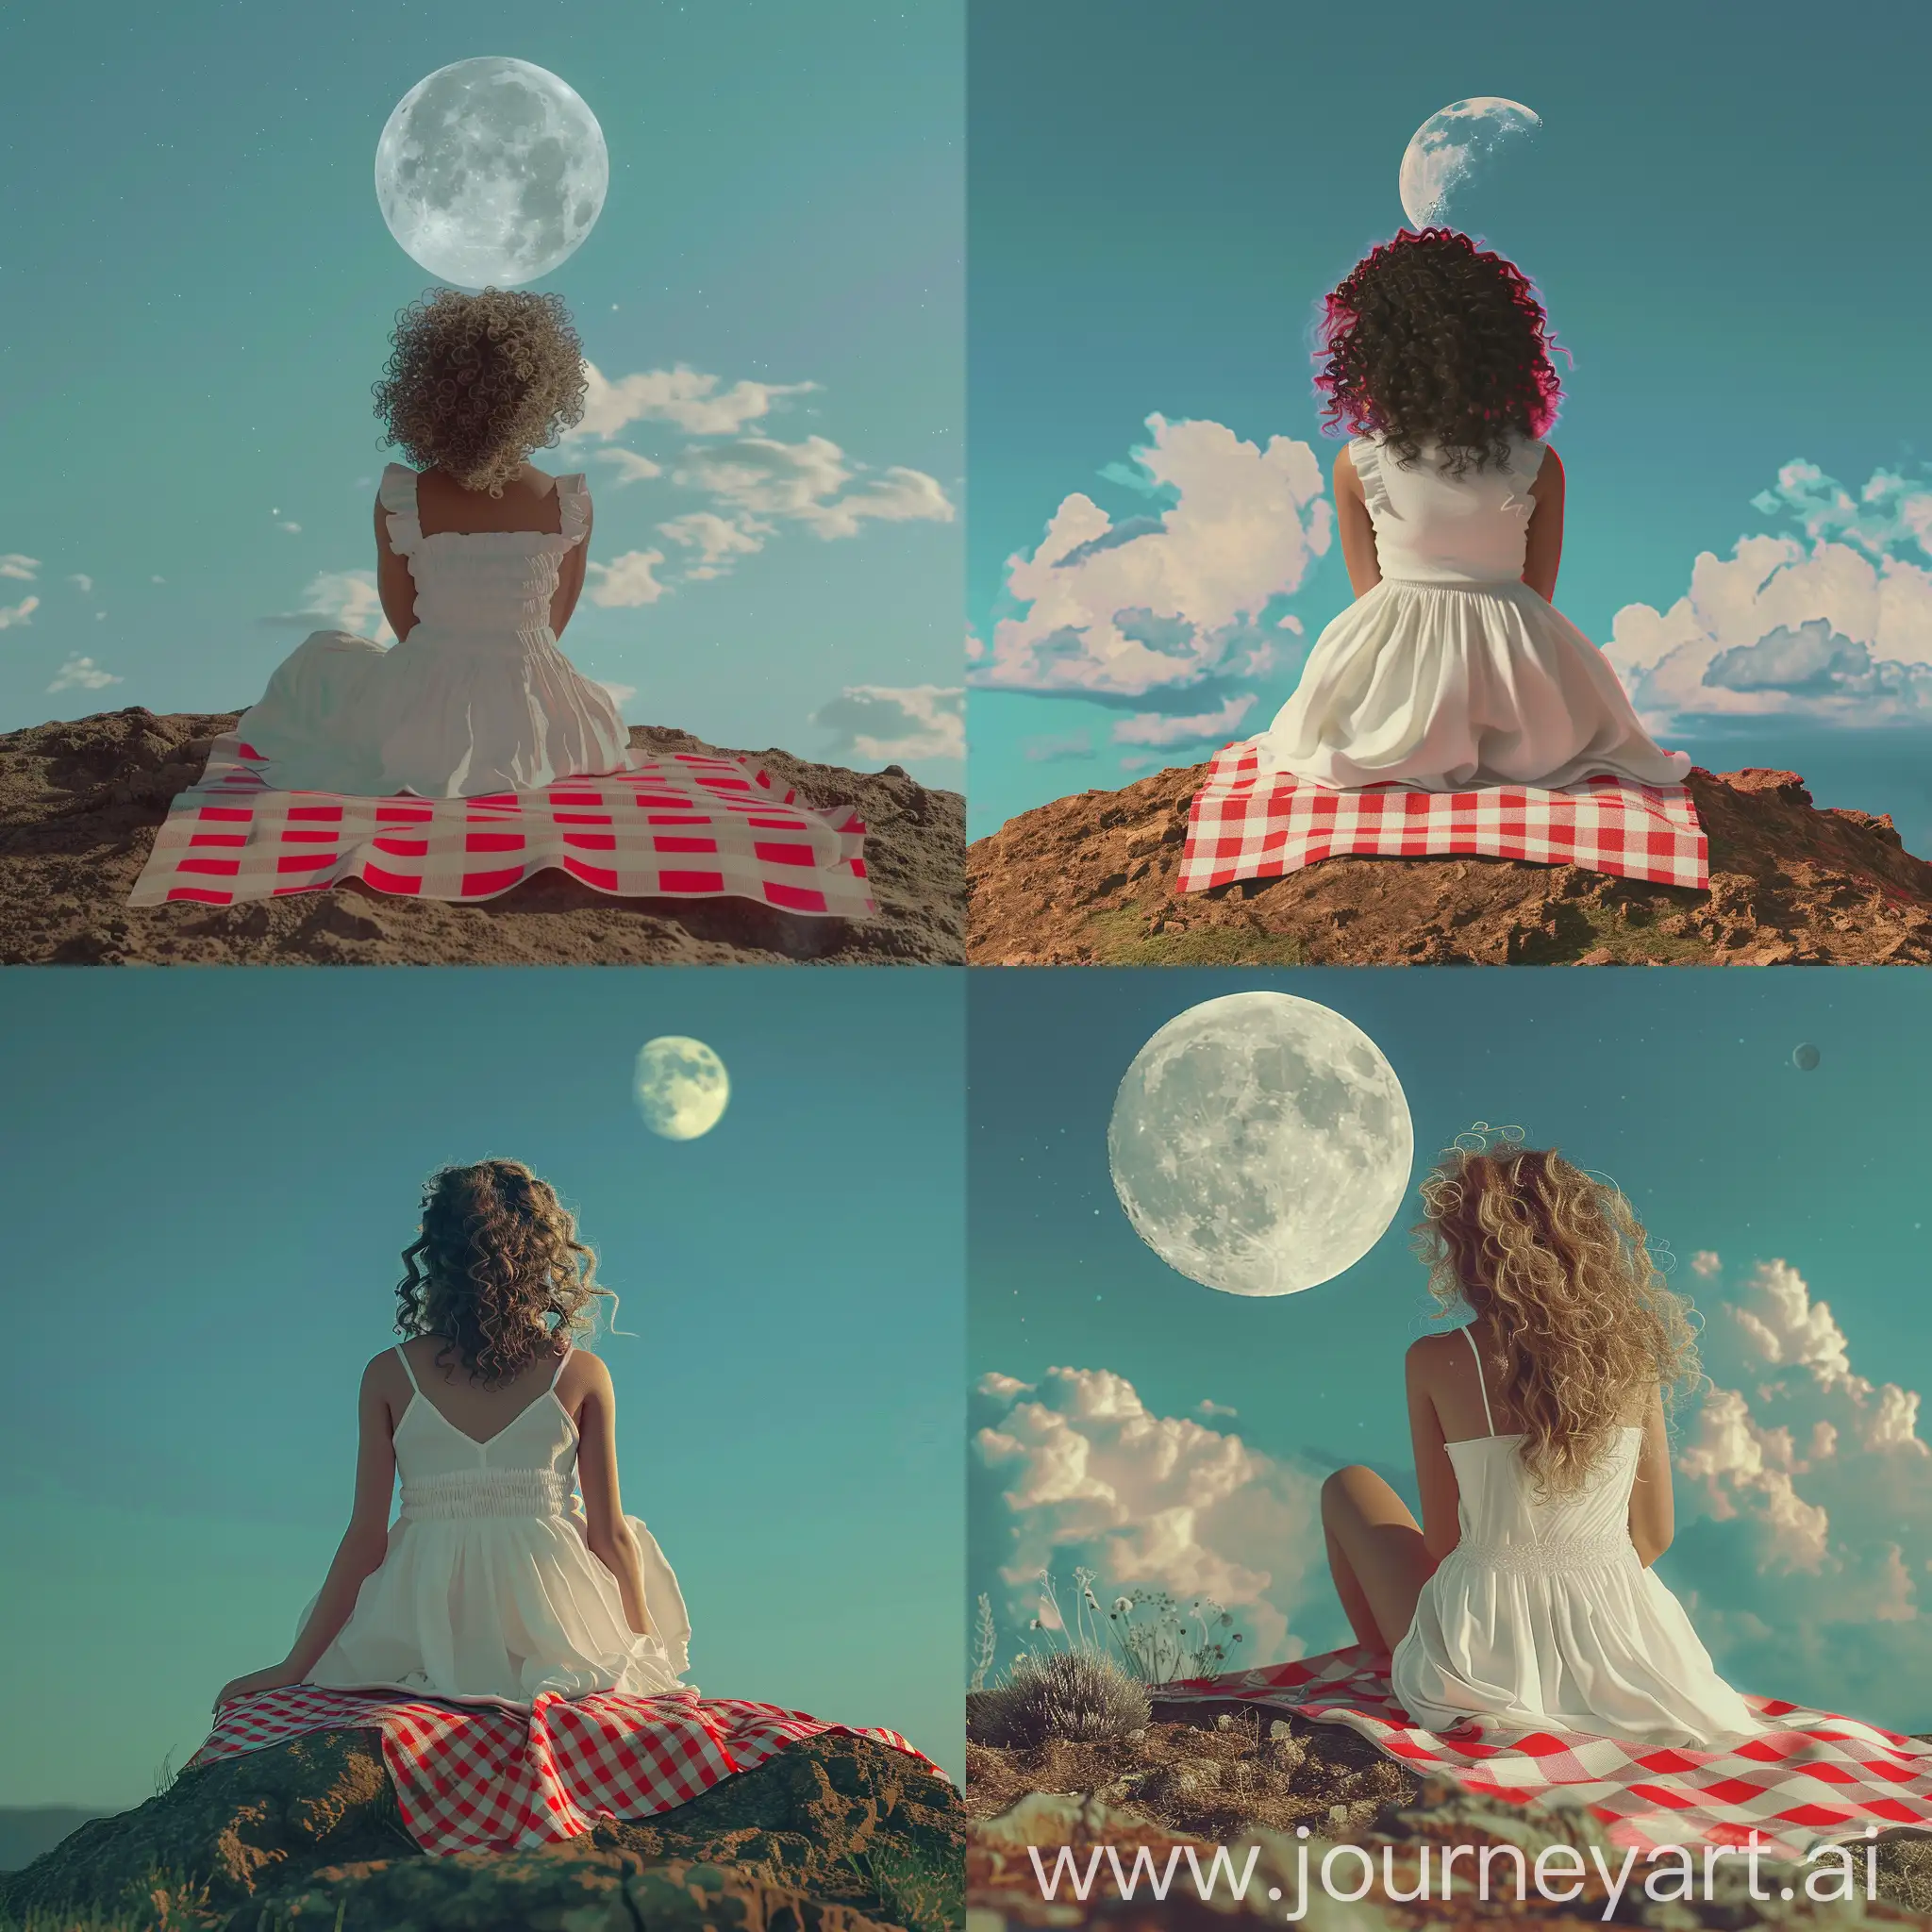 a curly hair girl wearing white dress on a hill sitting on Red and white checkered pattern picnic cloth watching moon on skies, cinematic, animation style